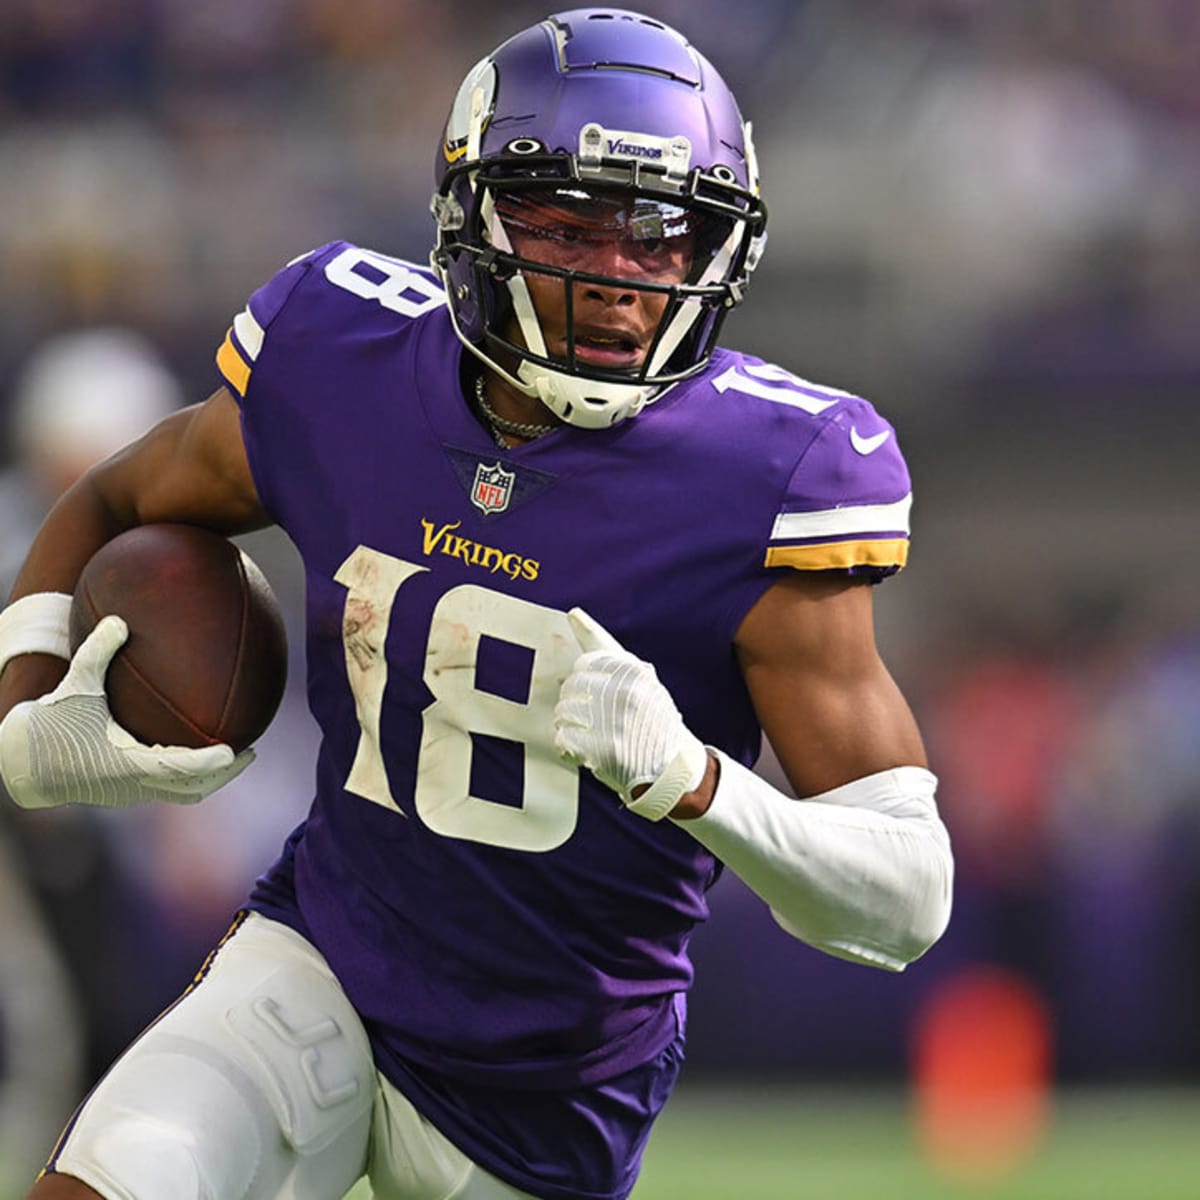 Week 9 Fantasy Football PPR Rankings & Projections: Dalvin Cook To Keep On  Rolling